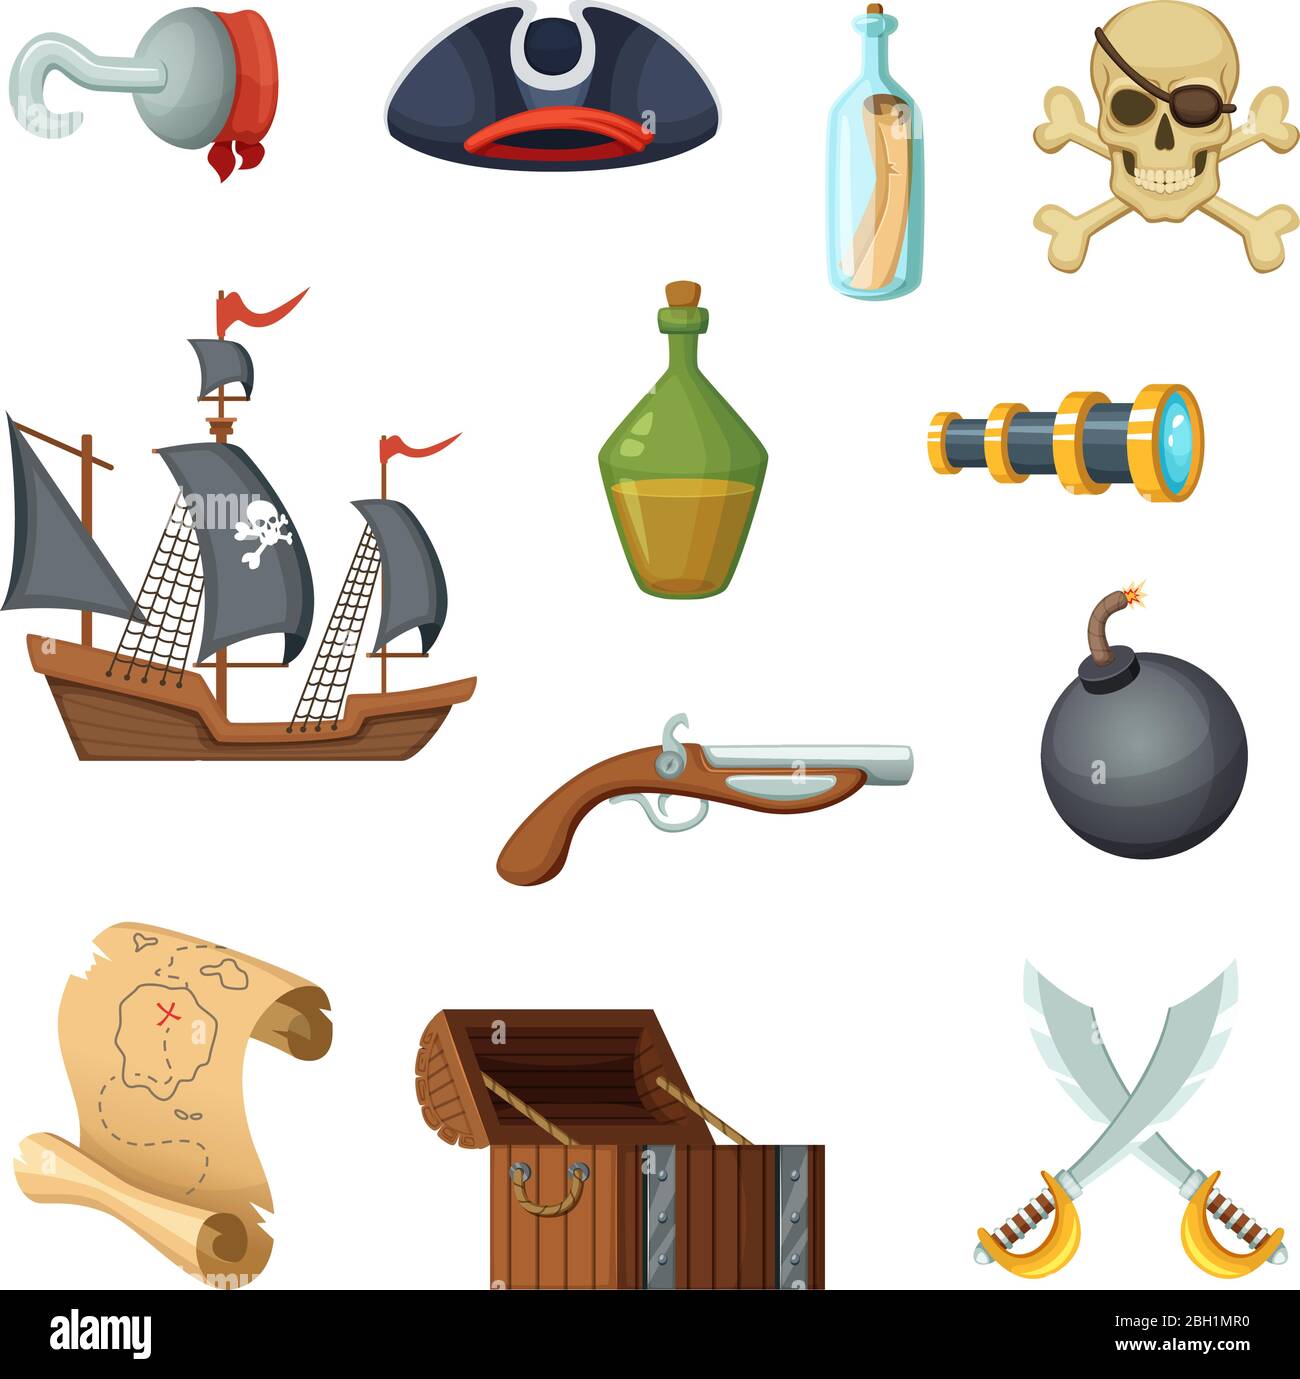 Different icon set of pirate theme. Skull, treasure map, battle ship of corsair and other objects in vector style. Illustration of pirate ship, treasu Stock Vector